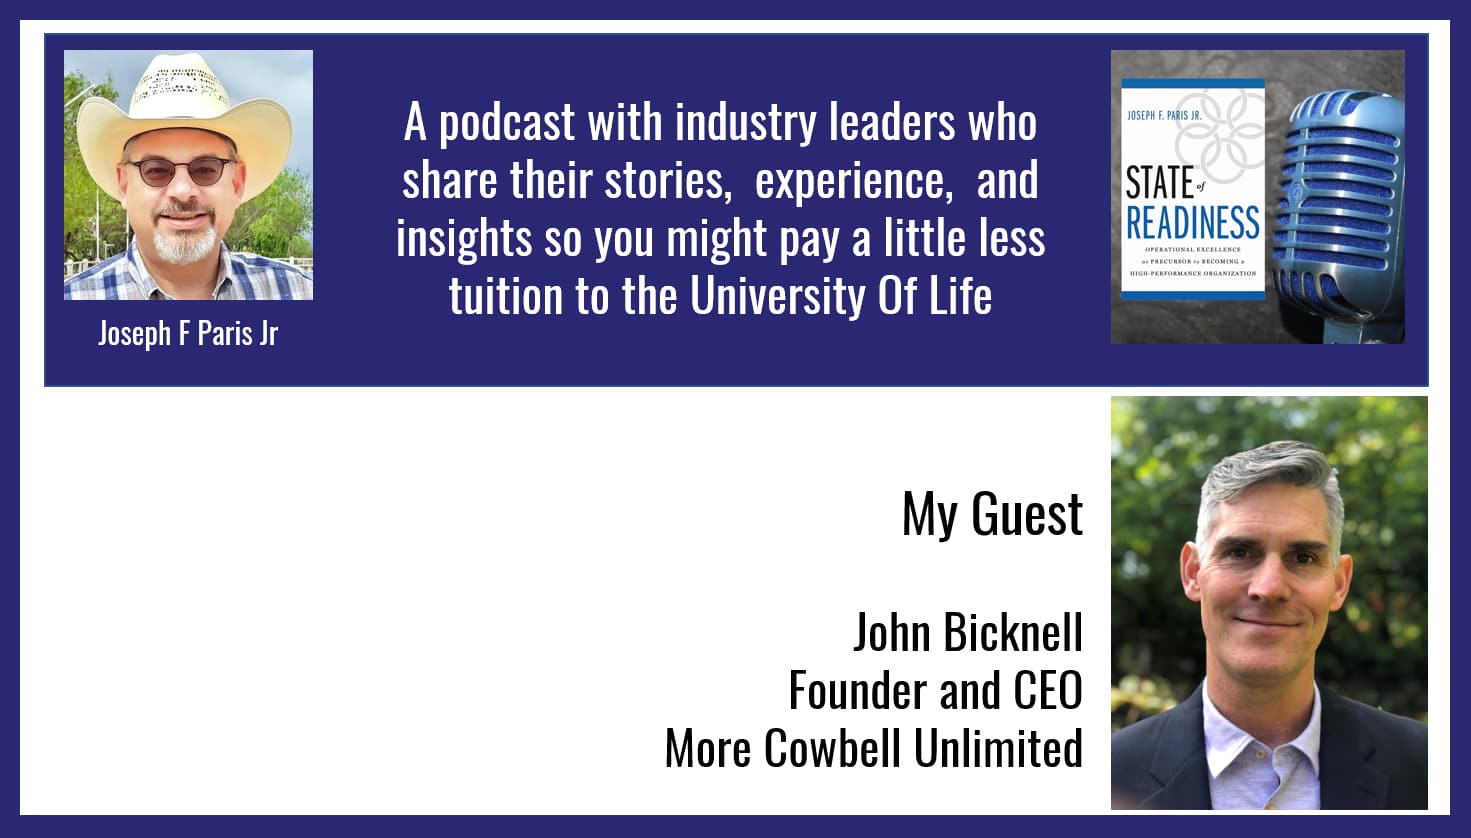 John Bicknell; CEO and Founder of More Cowbell Unlimited